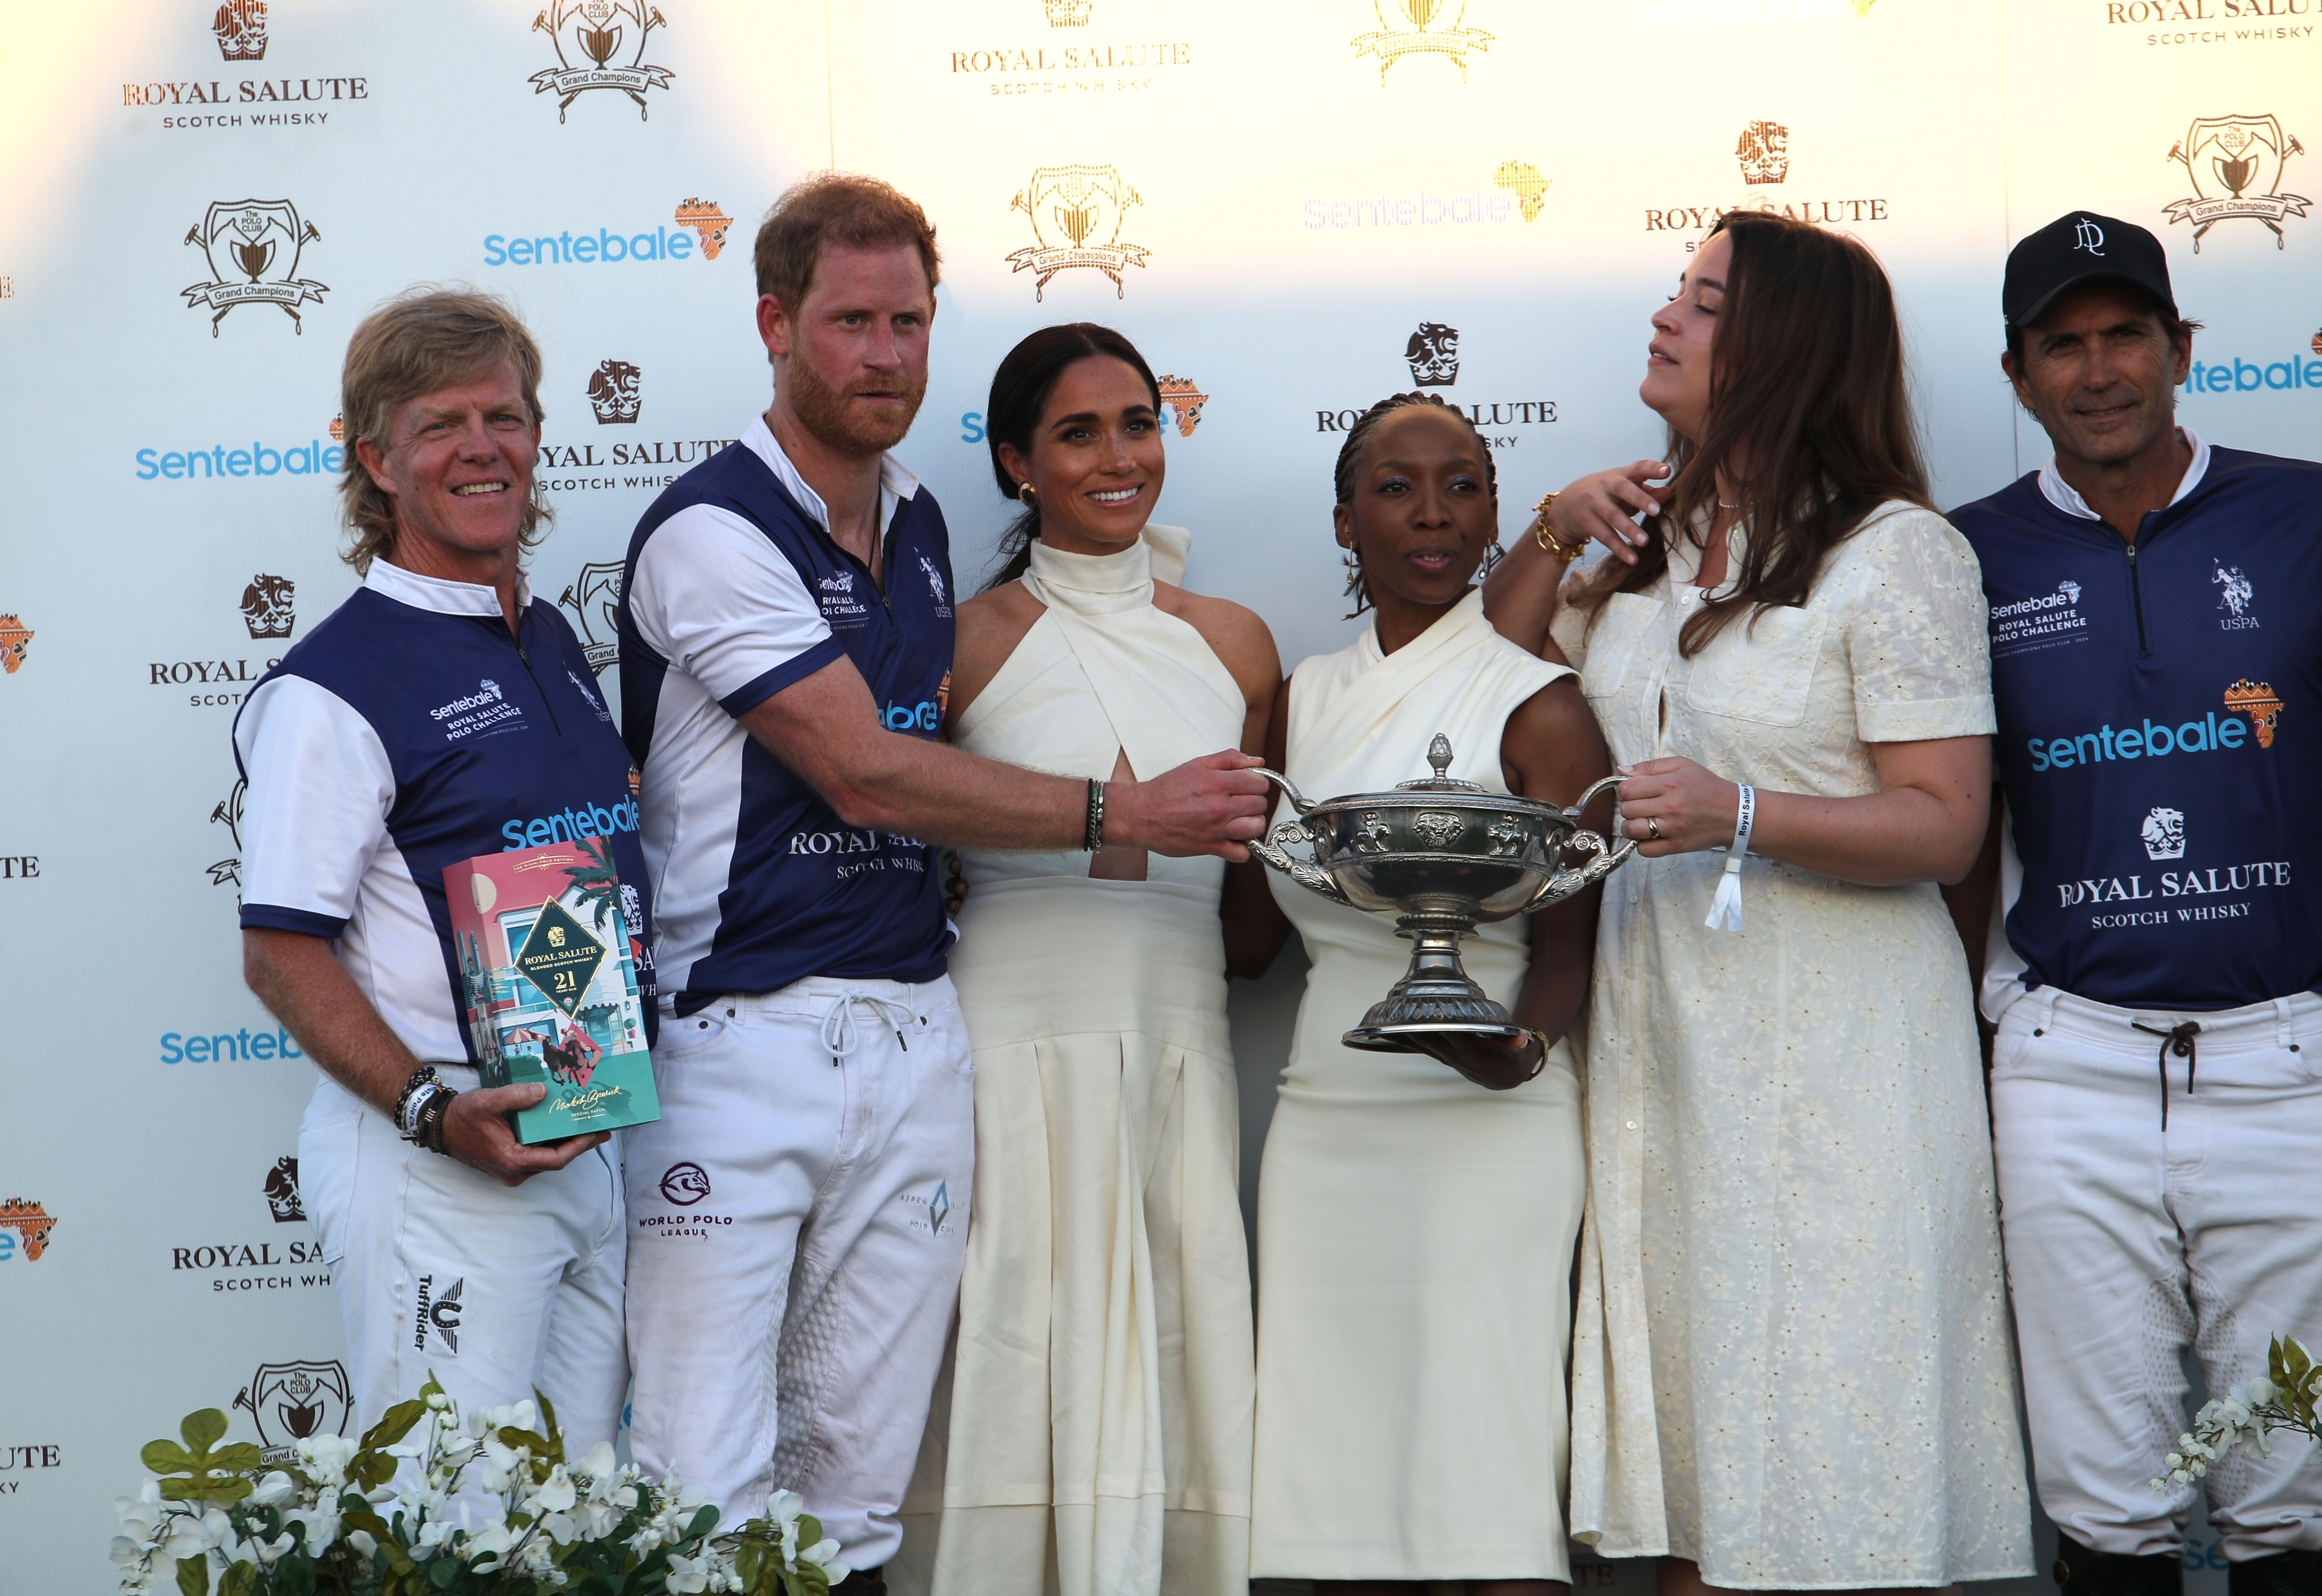 Meghan Markle, Duchess of Sussex presents the trophy to Prince Harry, The Duke of Sussex after his team wins, in the Royal Salute Polo Challenge, to benefit Sentebale, in Wellington, Florida, on April 12, 2024. | Source: Getty Images